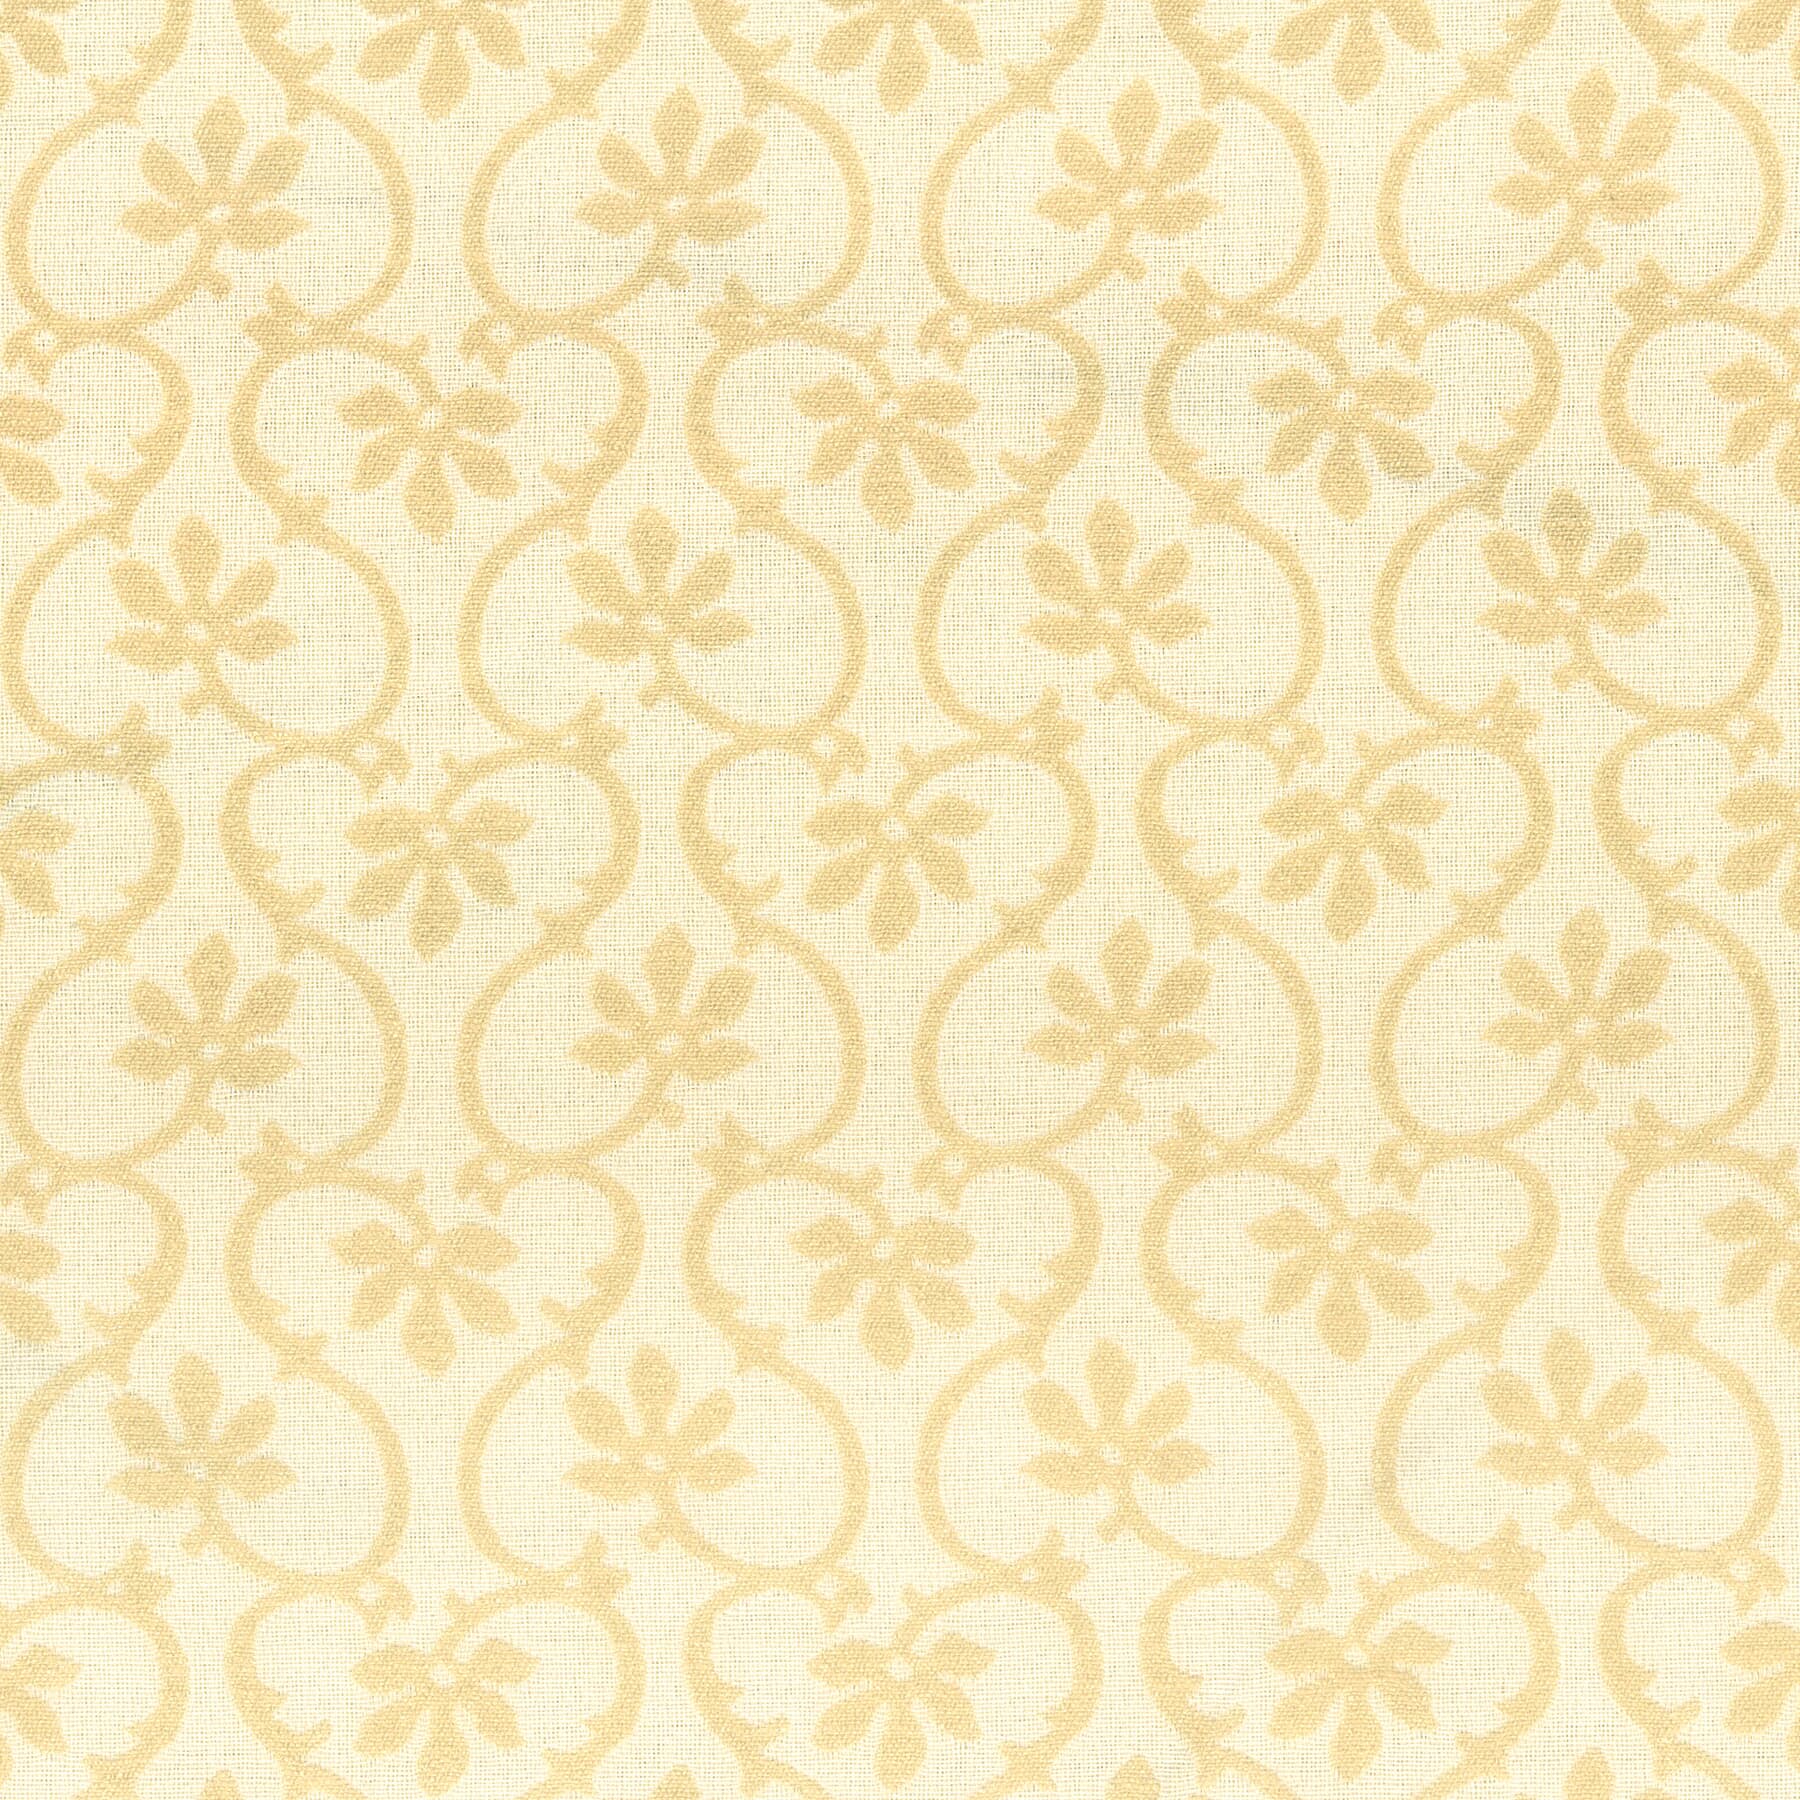 7615-03 Floral Scroll by Stout Fabric